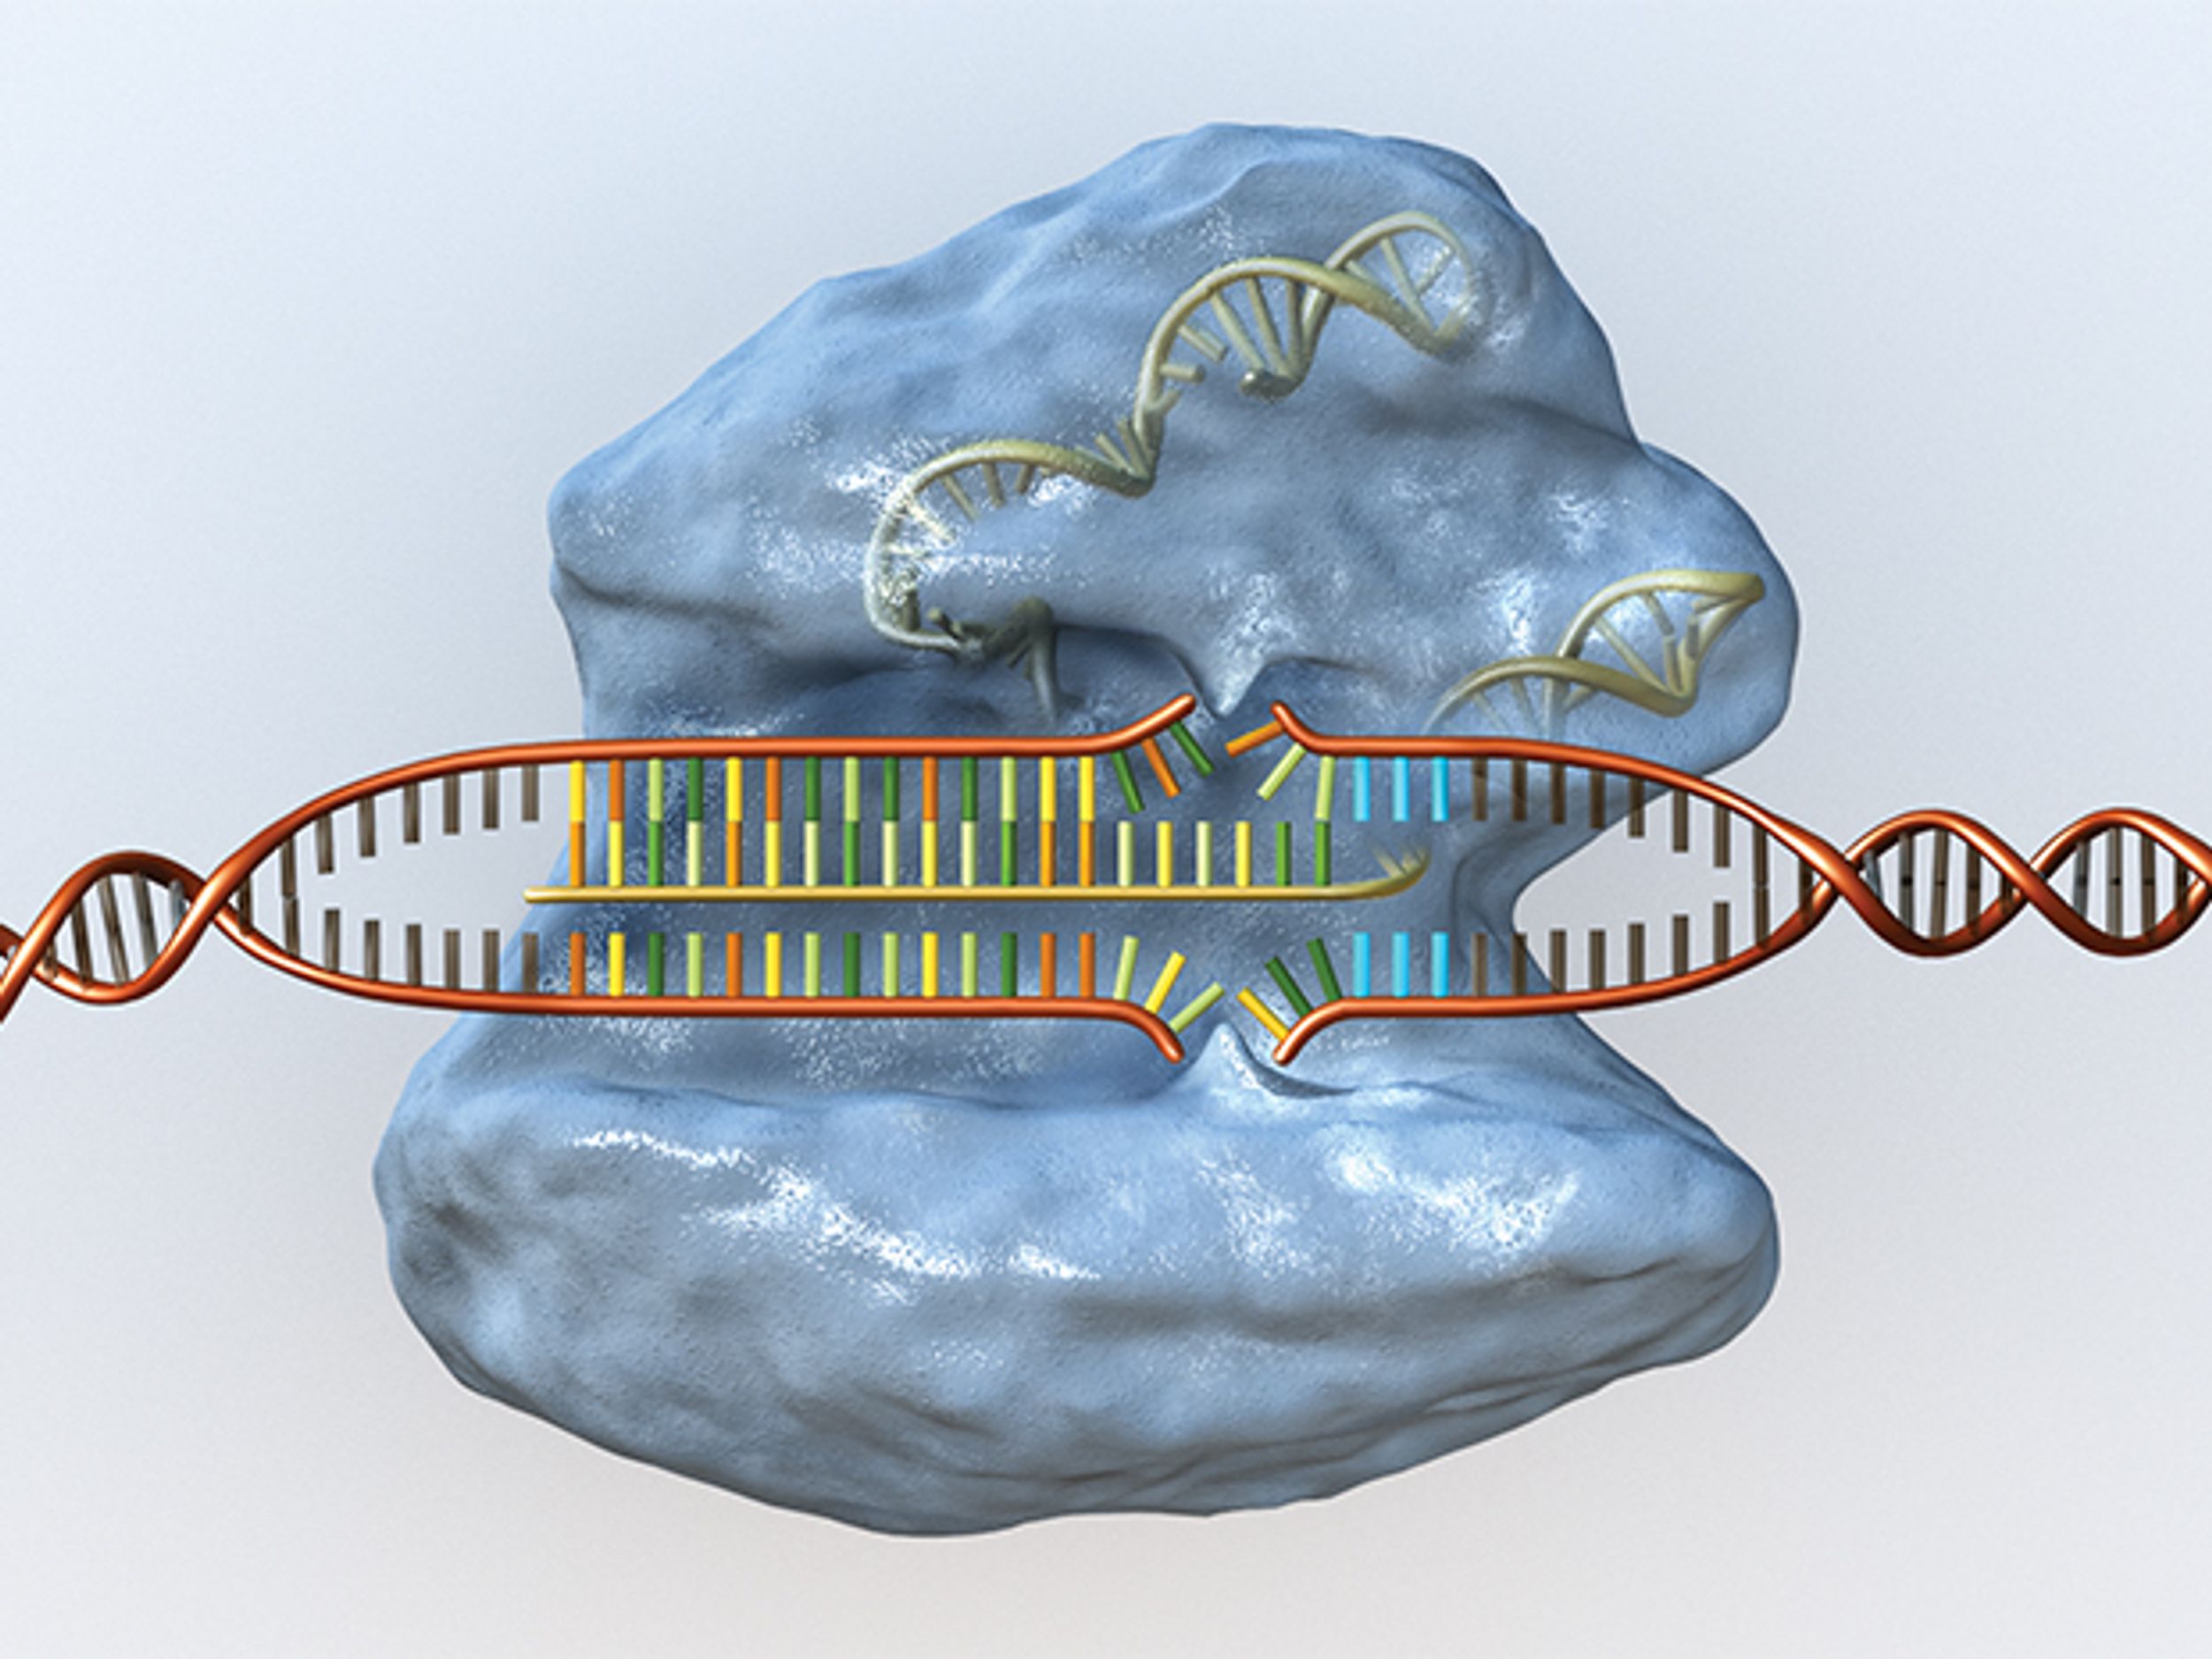 Software Helps Gene Editing Tool CRISPR Live Up to Its Hype